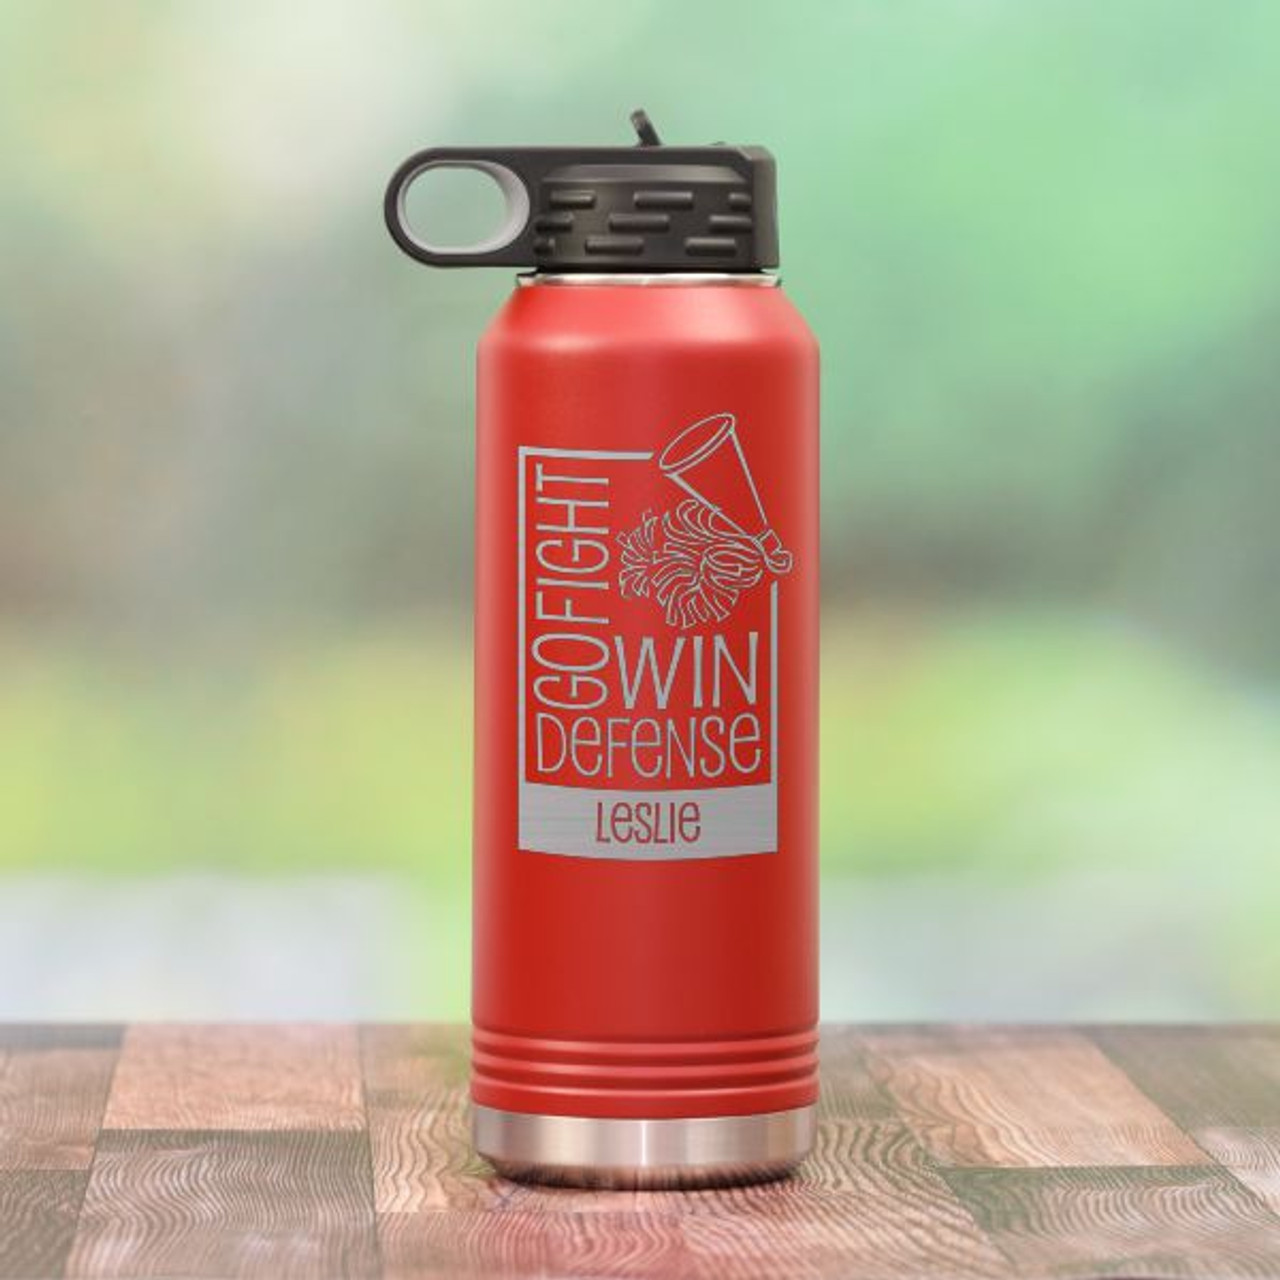 https://cdn11.bigcommerce.com/s-mdwz5t7wme/images/stencil/1280x1280/products/2234/6311/DW5083-Cheer-waterbottle__02771.1701712317.jpg?c=2?imbypass=on